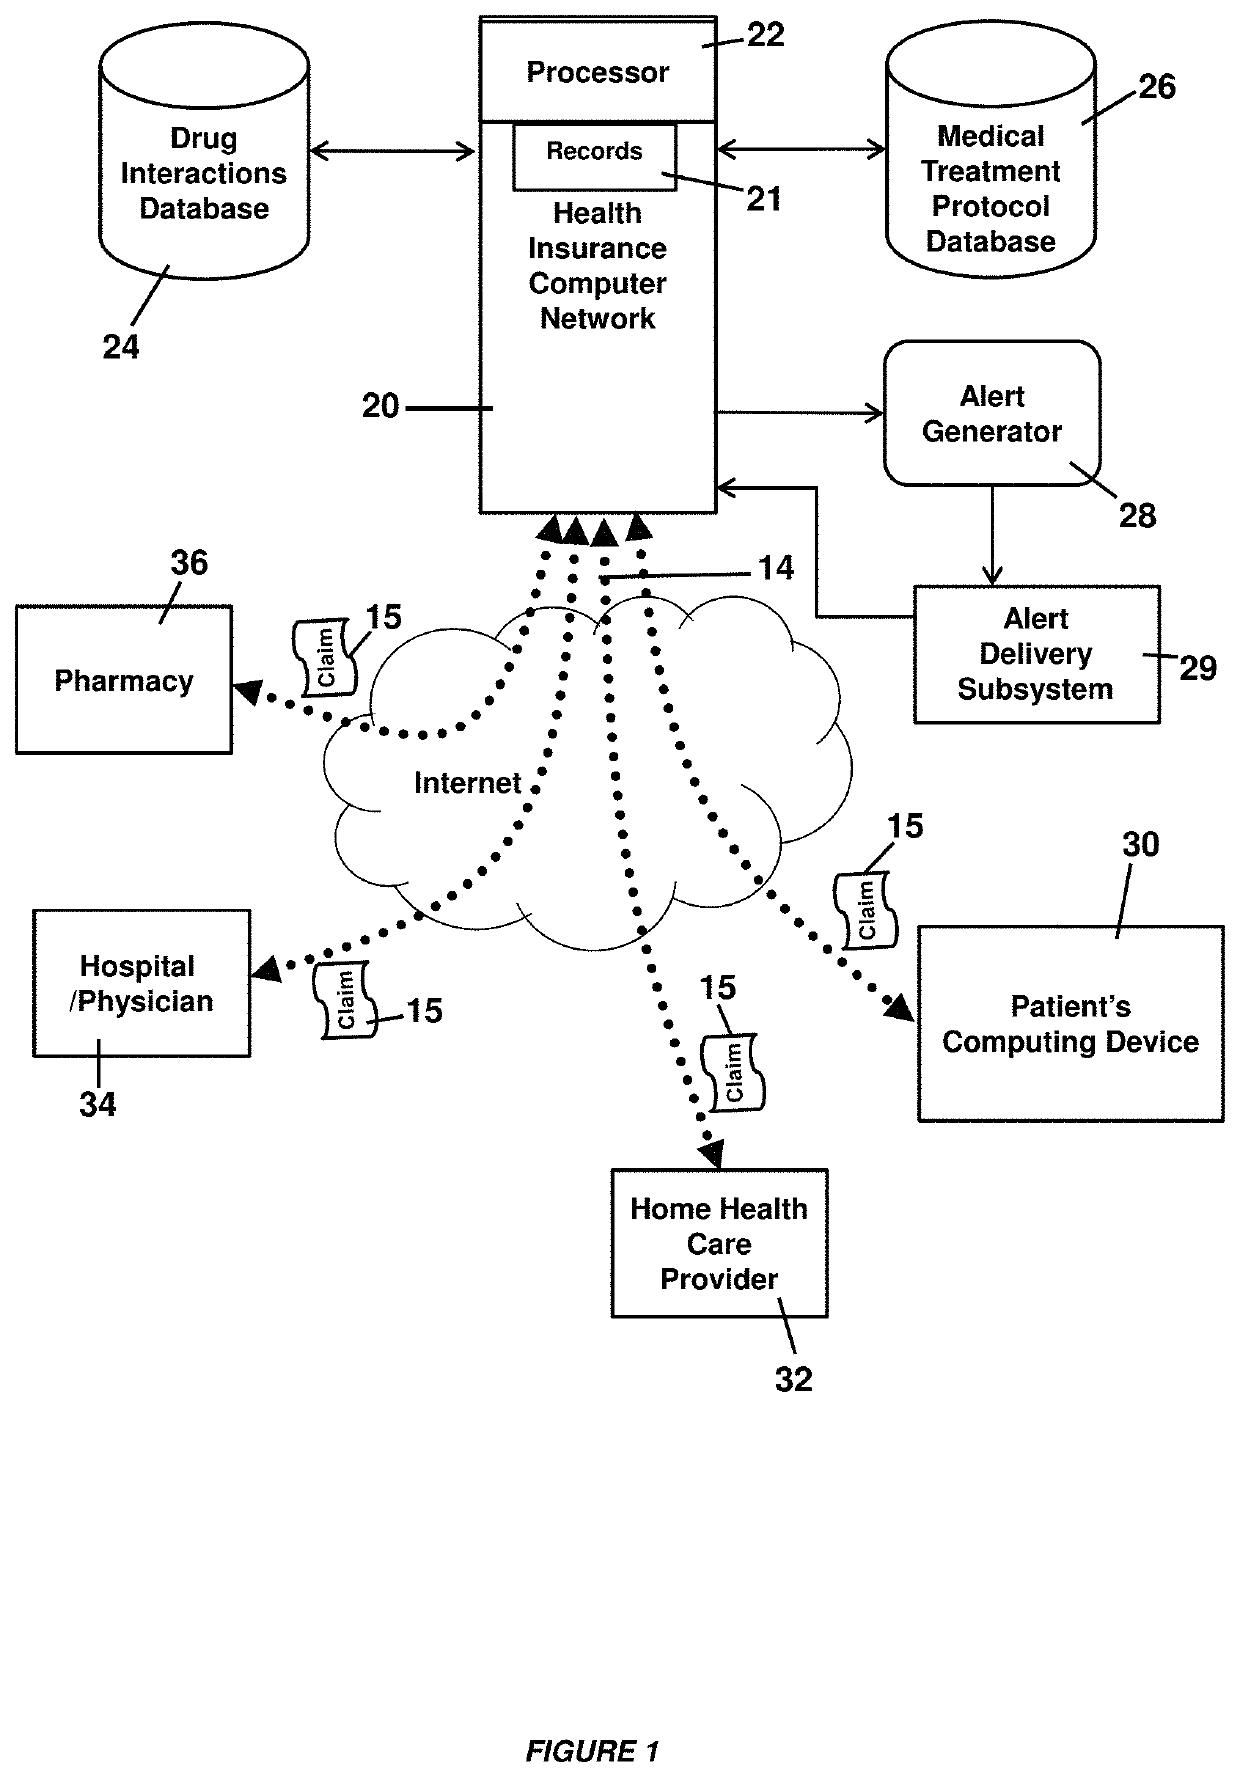 Systems and methods for drug interaction alerts